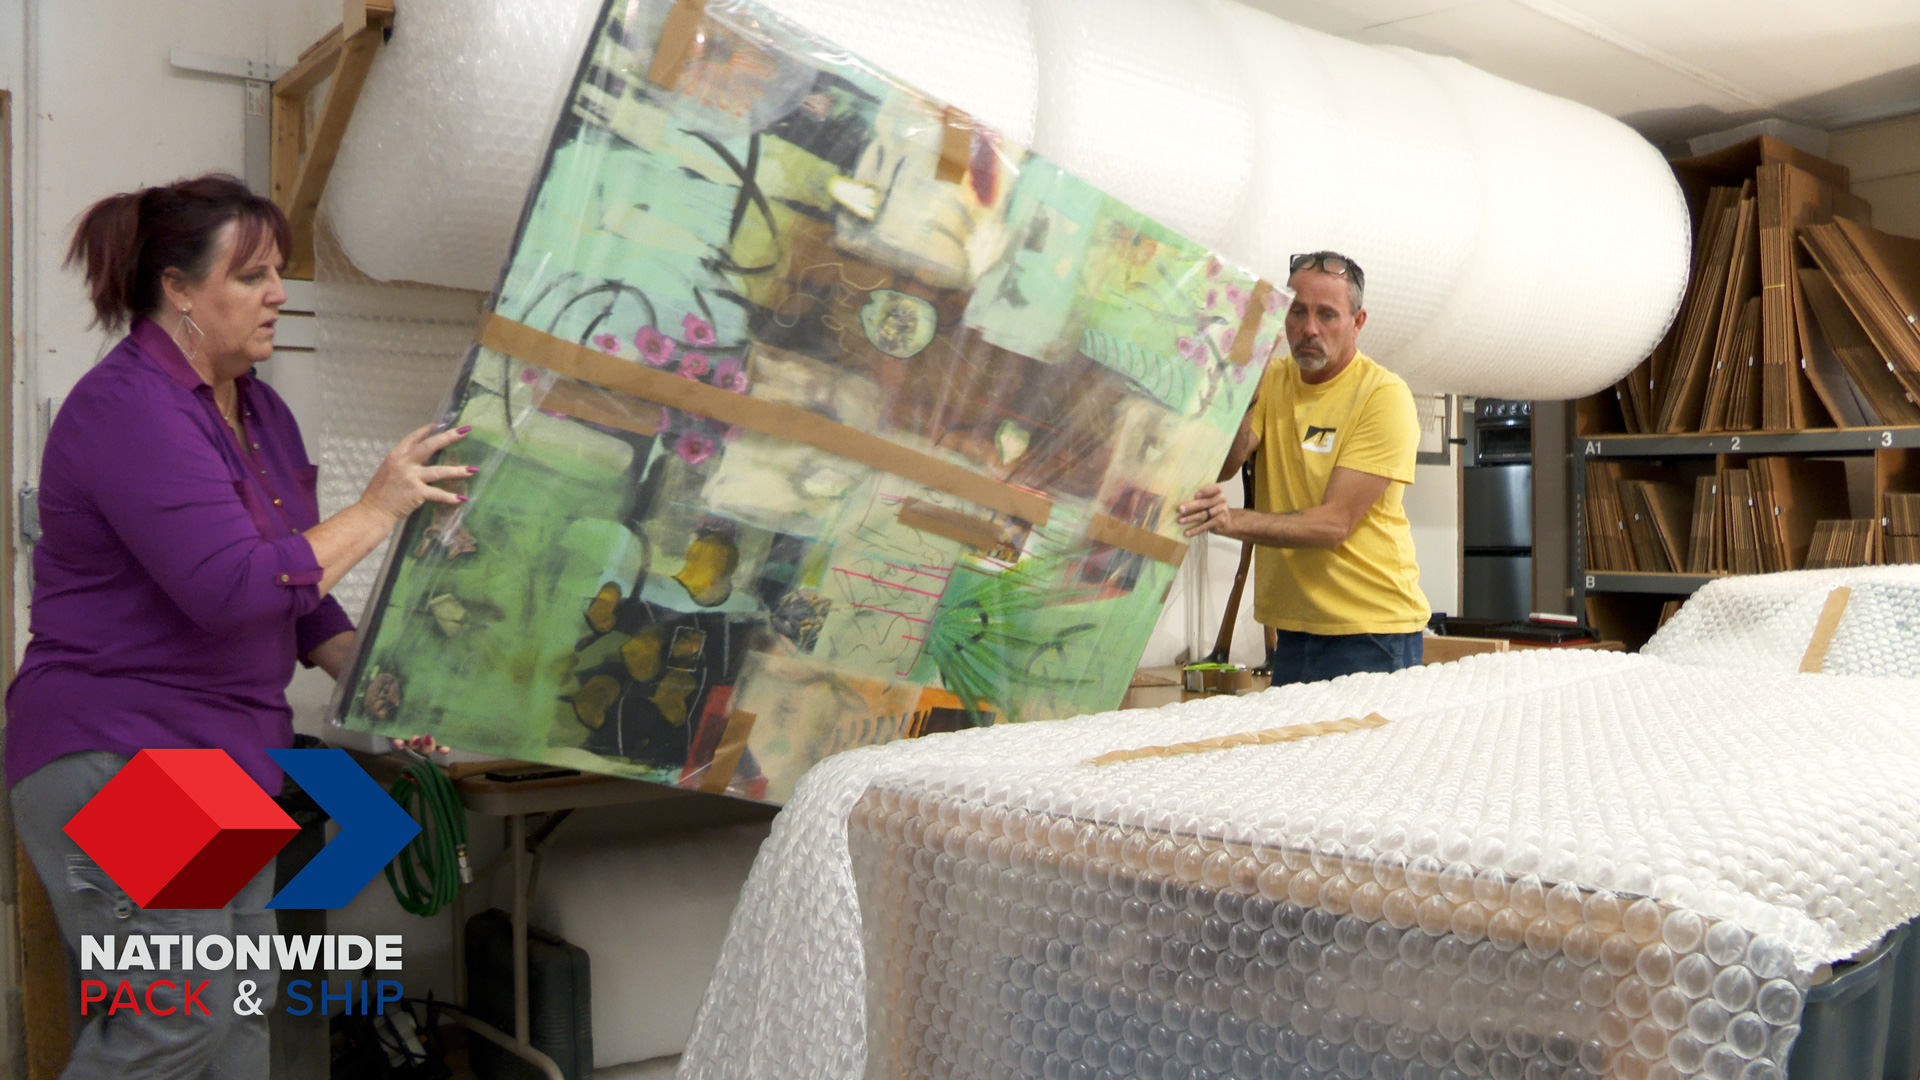 Expert art packing and shipping at Nationwide Pack and Ship in Sedona, Arizona